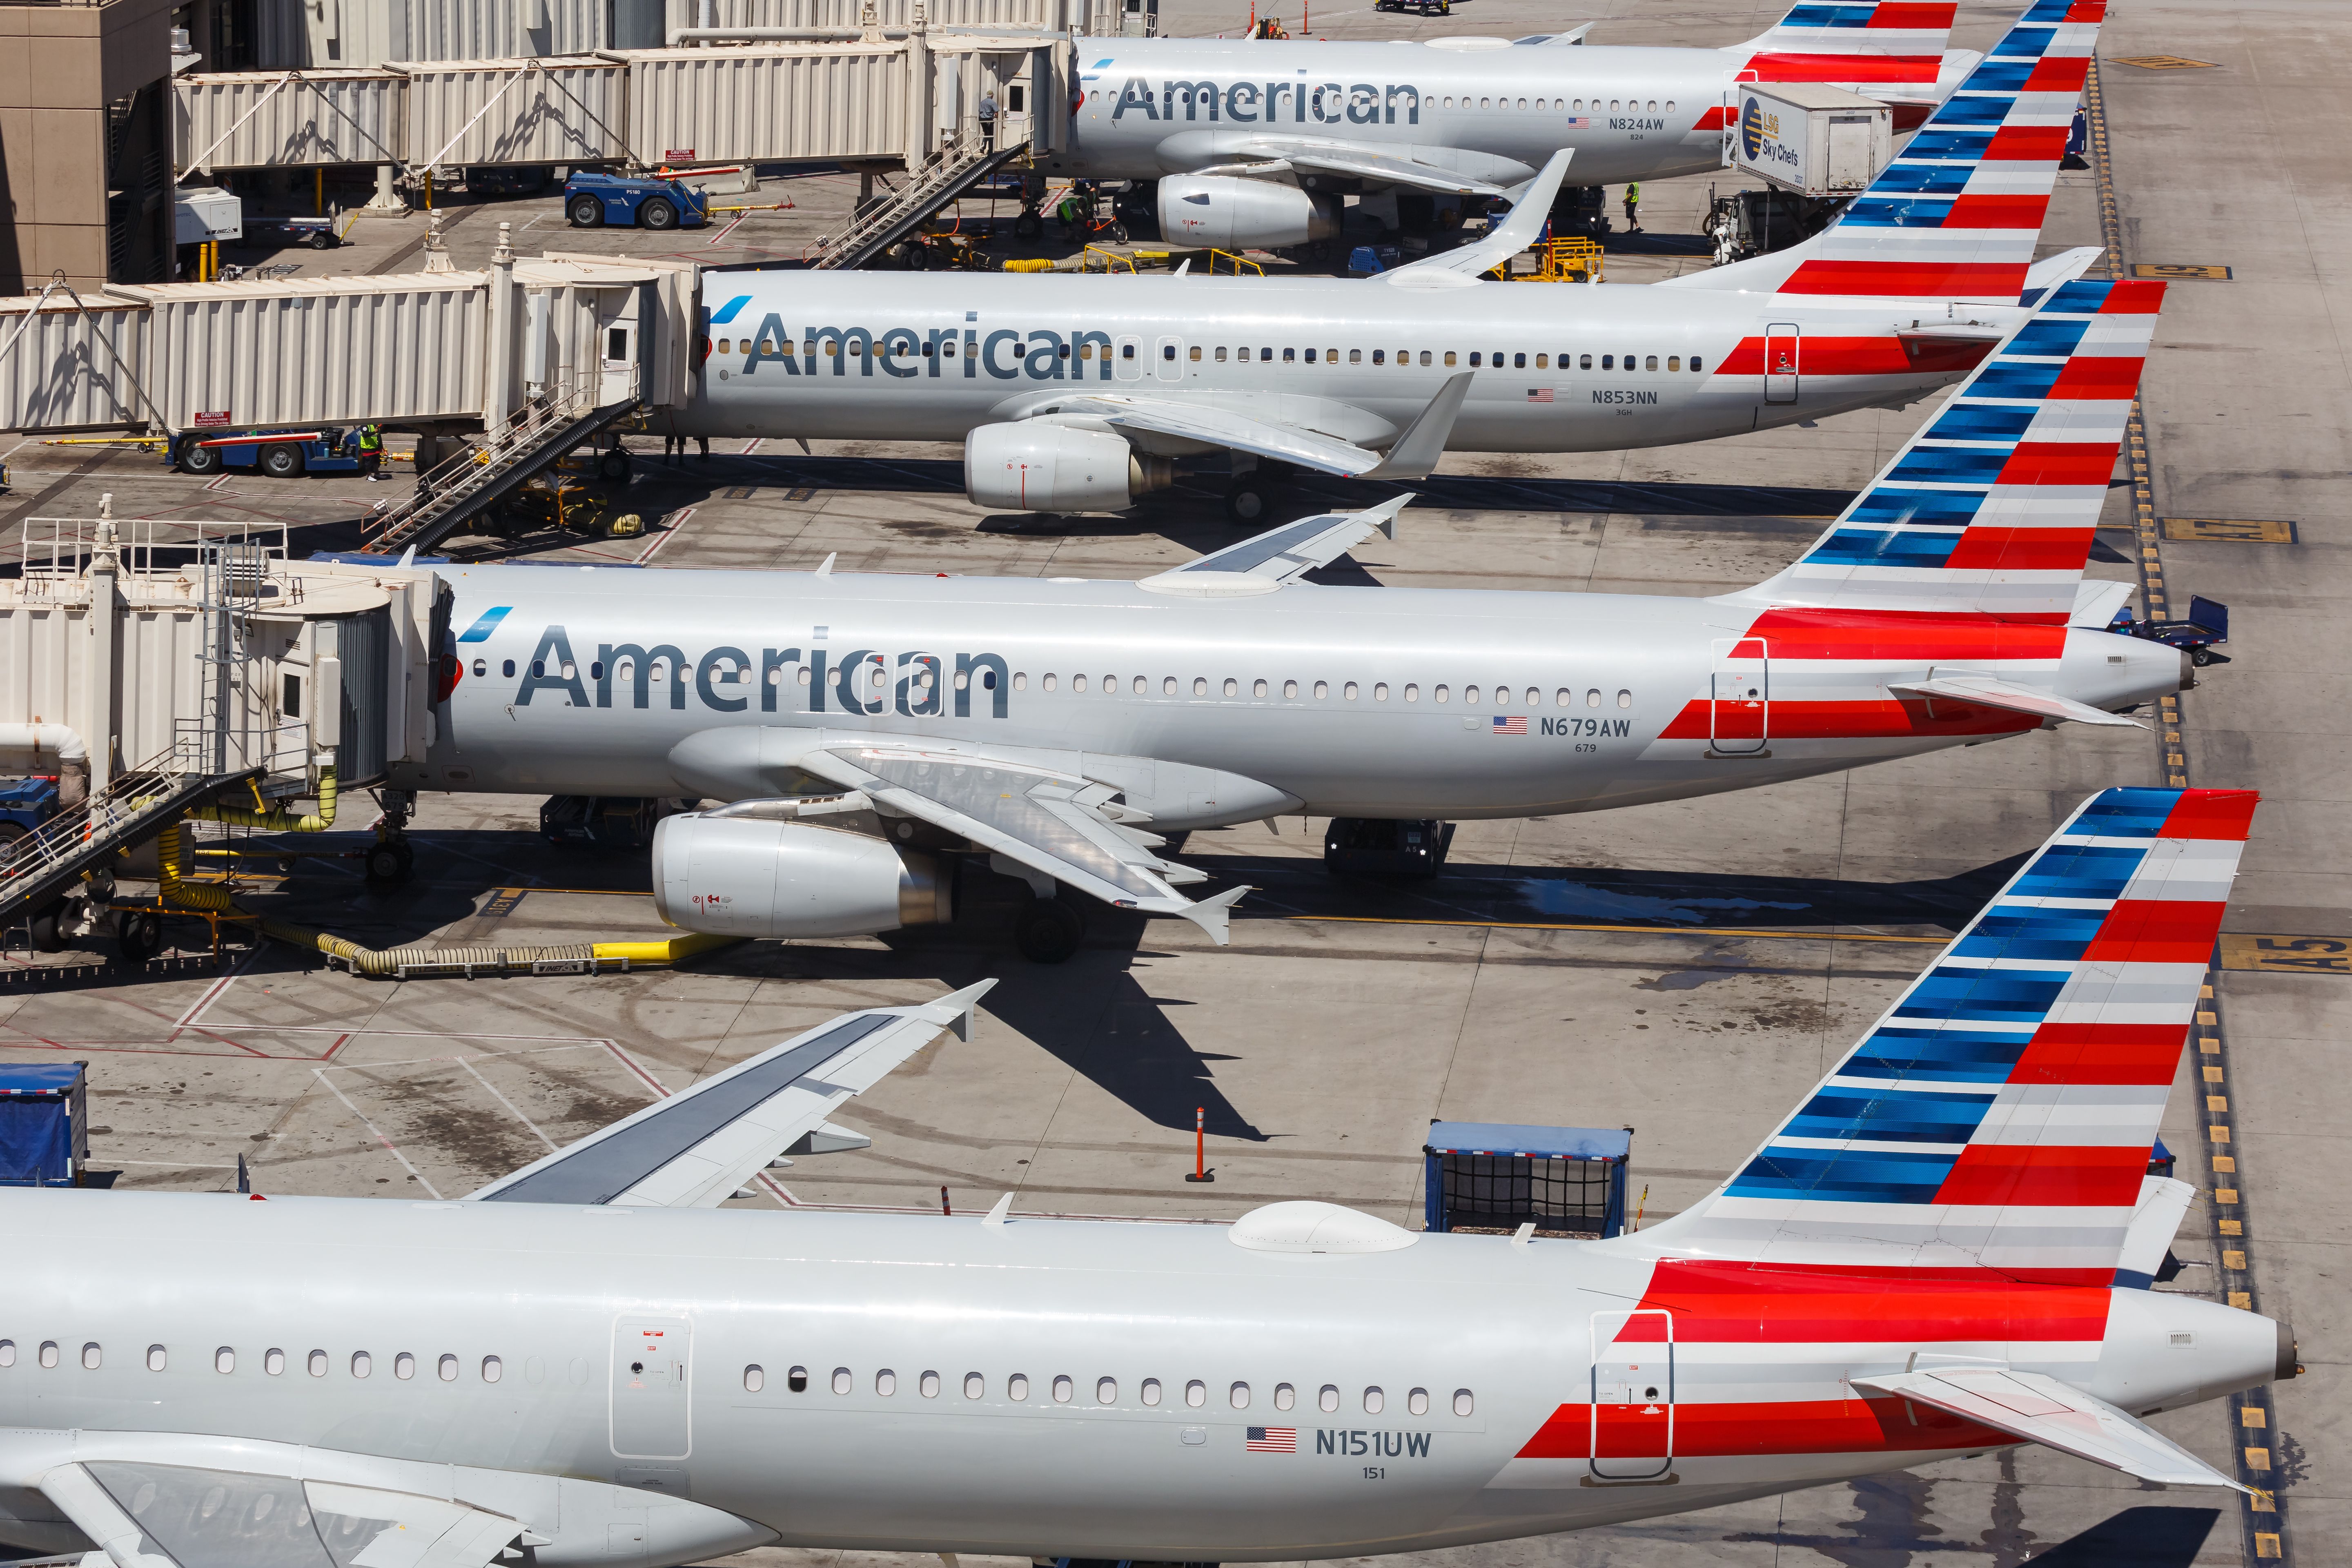 American Airlines aircraft parked at an airport